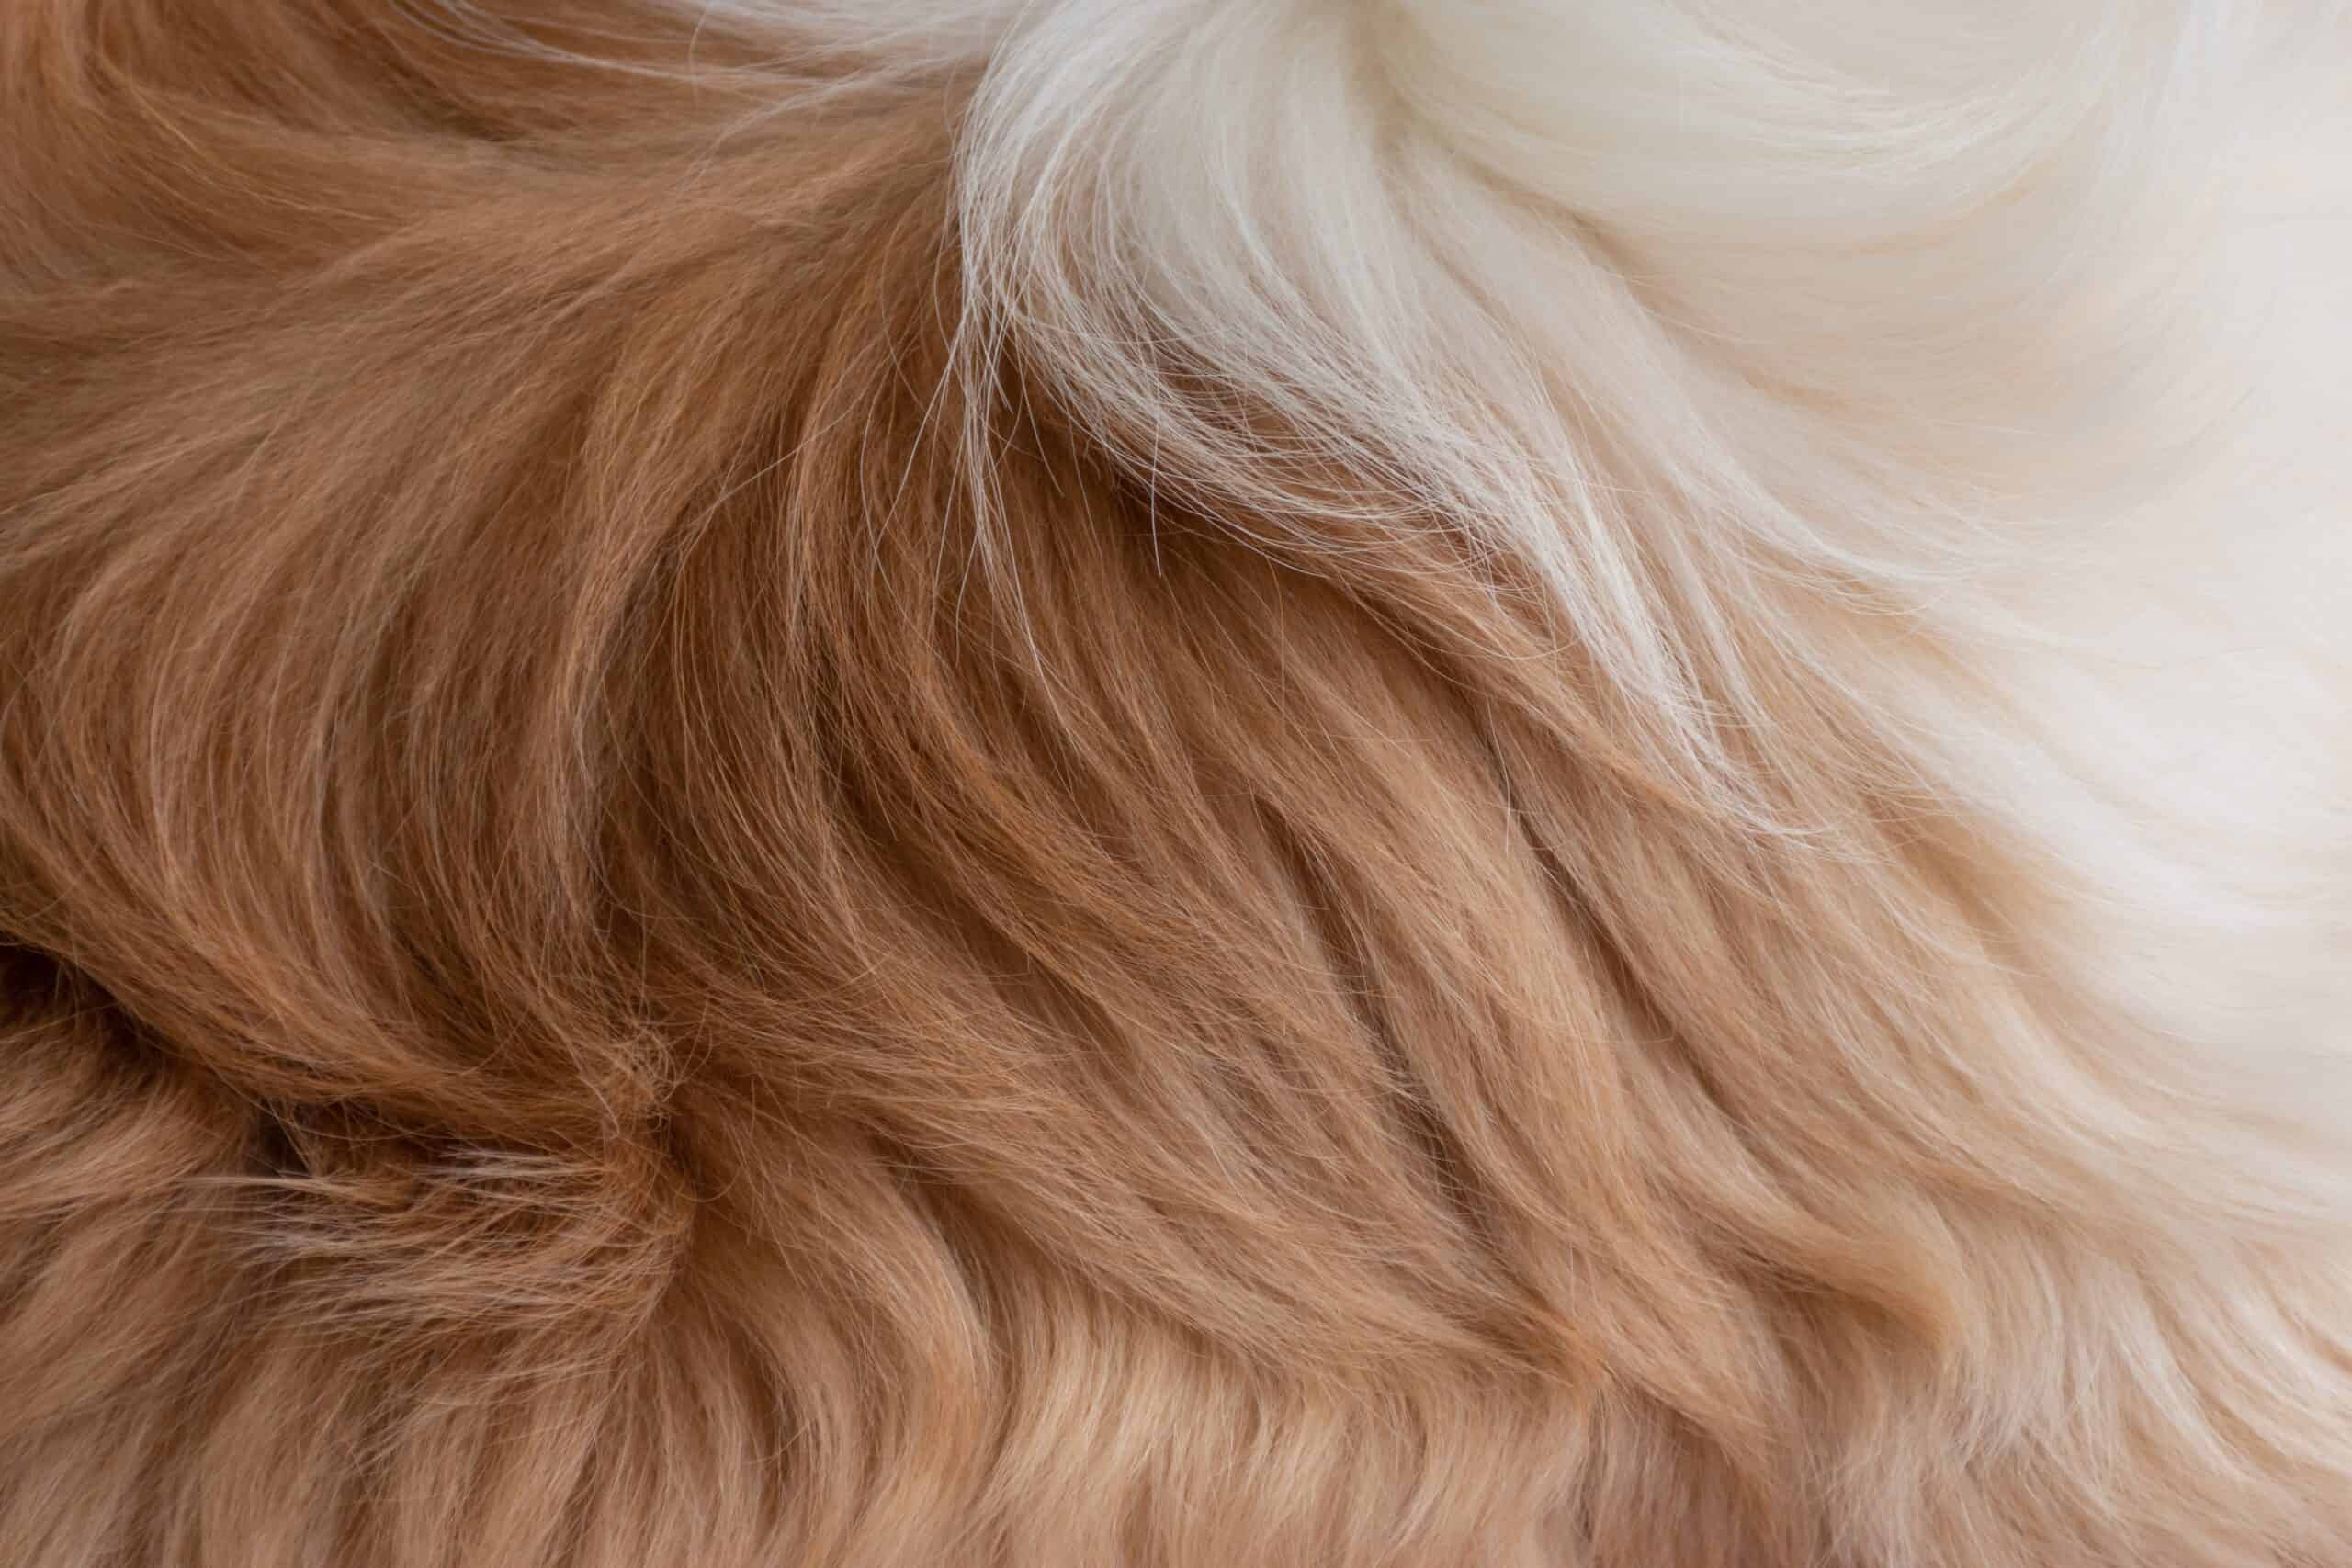 What are Cowlicks on Dogs?